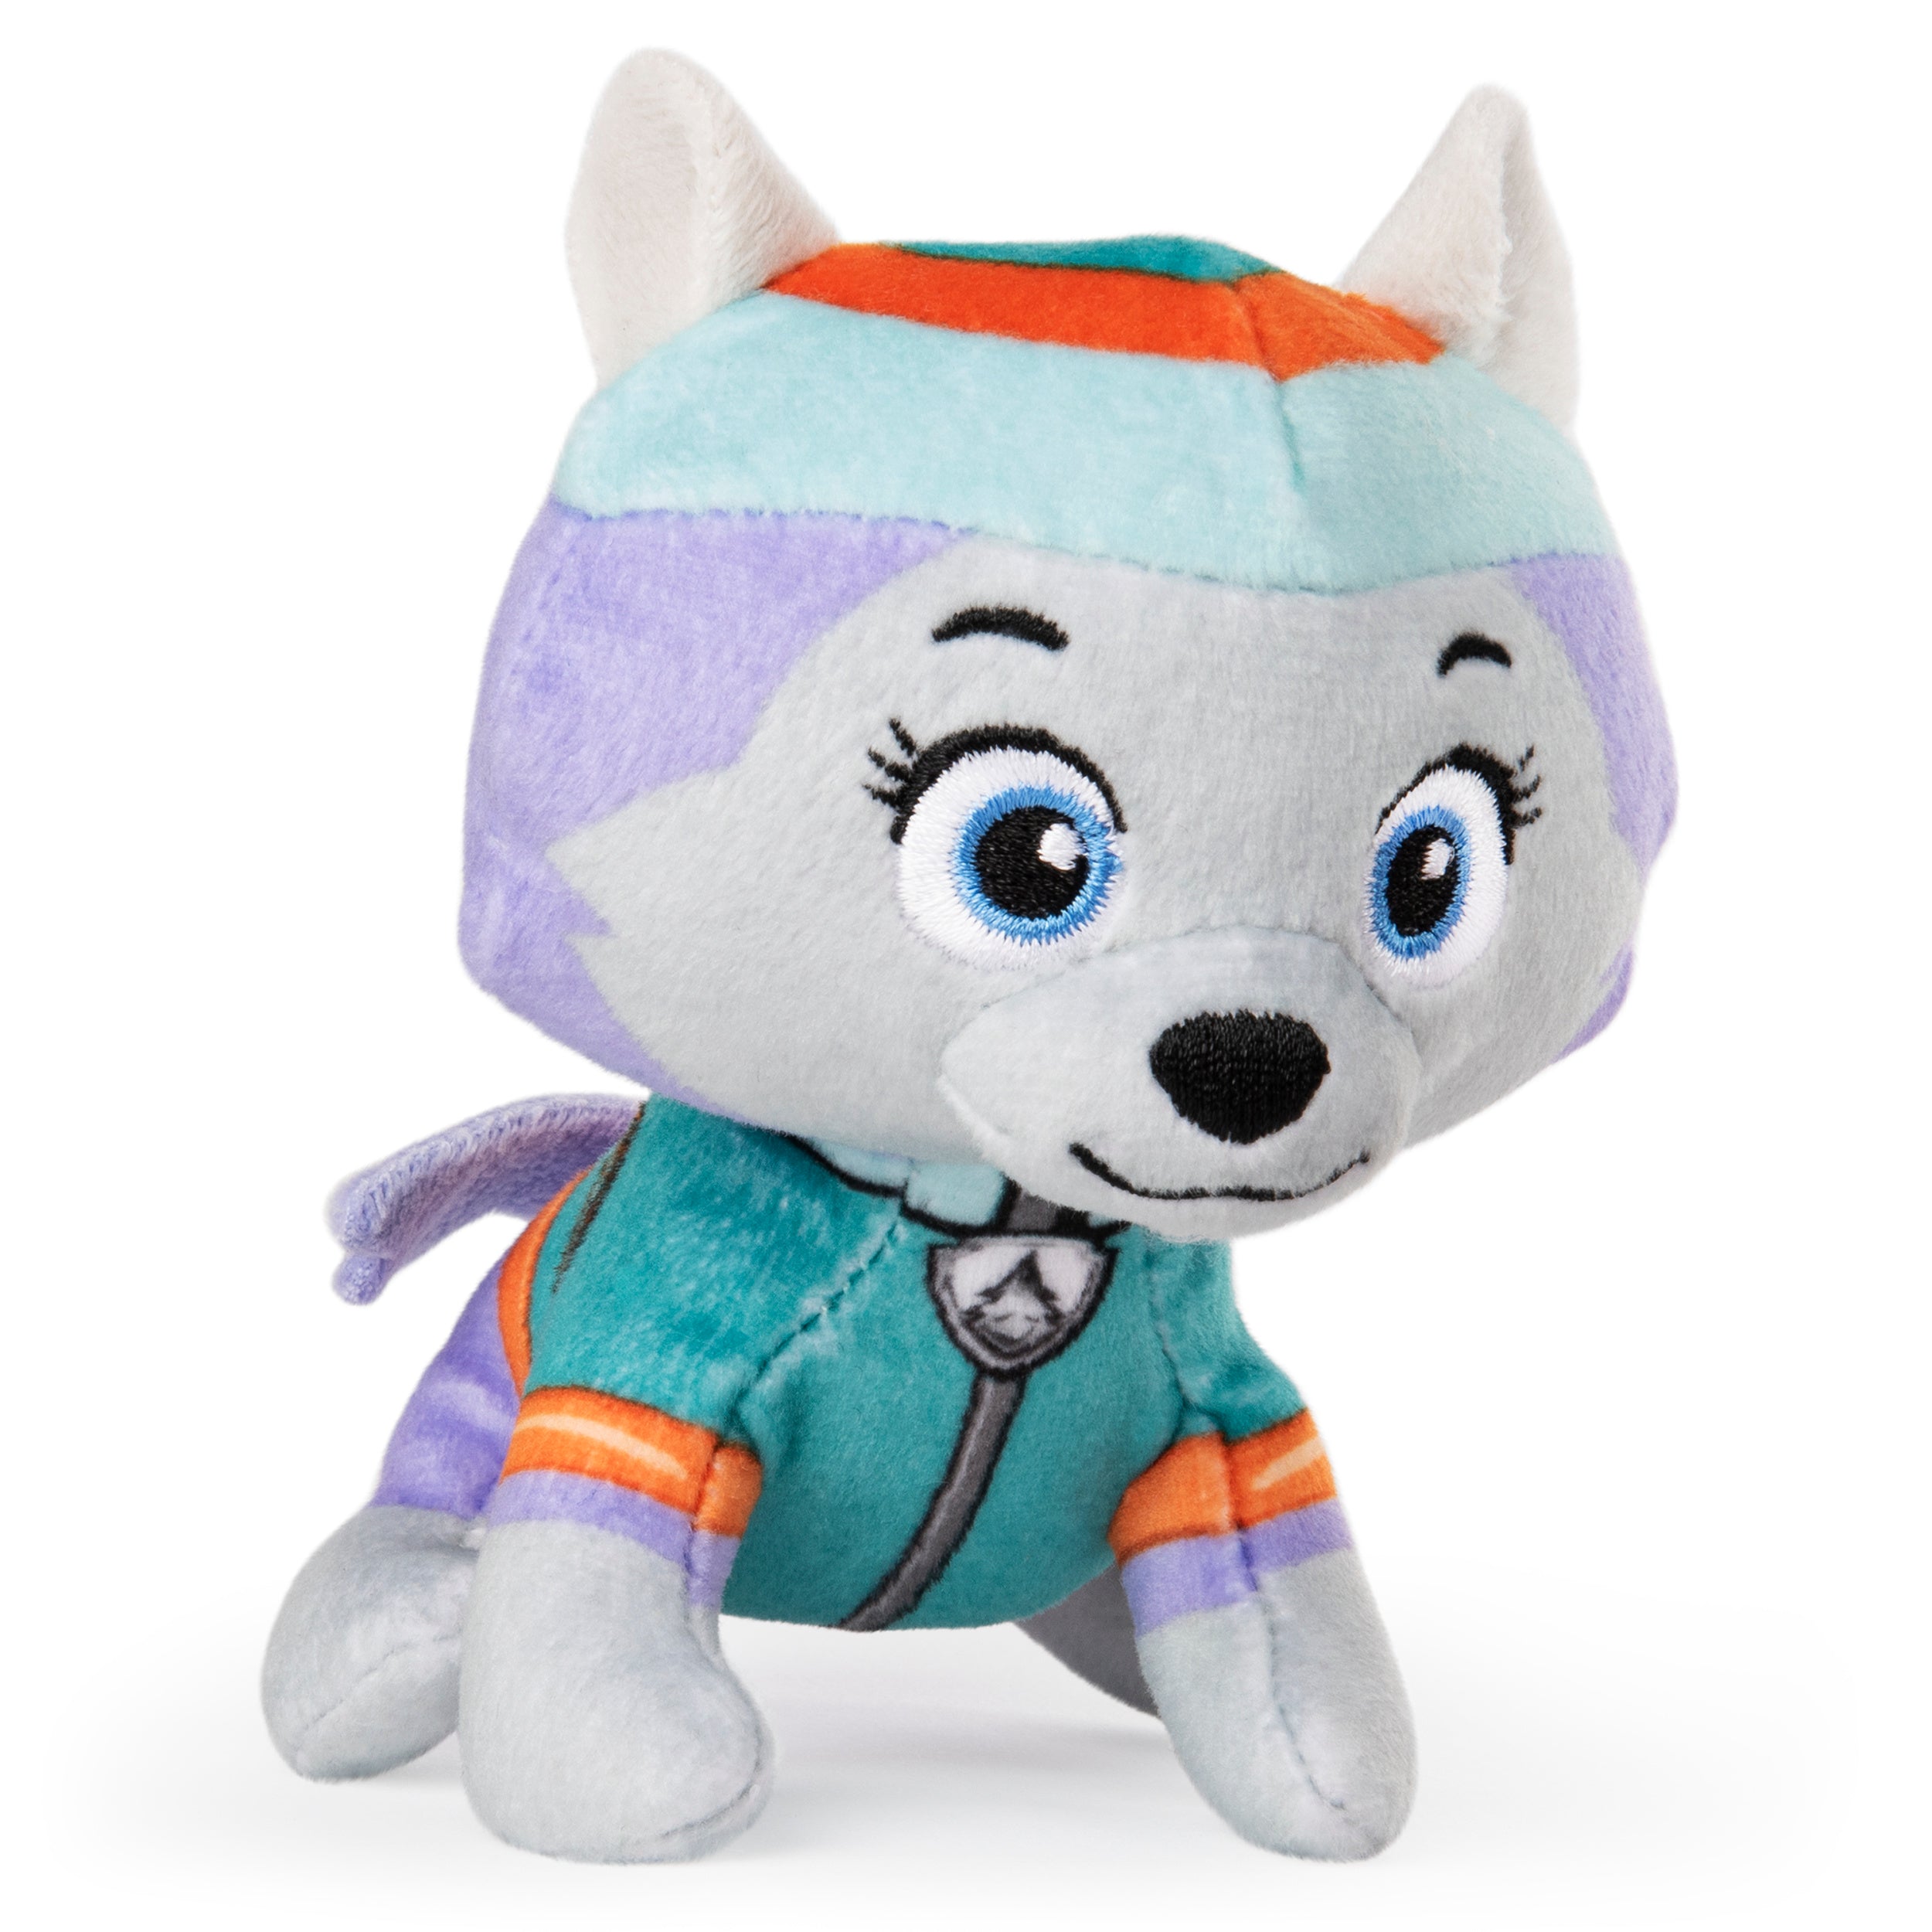 PAW PATROL PLUSH EVEREST - THE TOY STORE